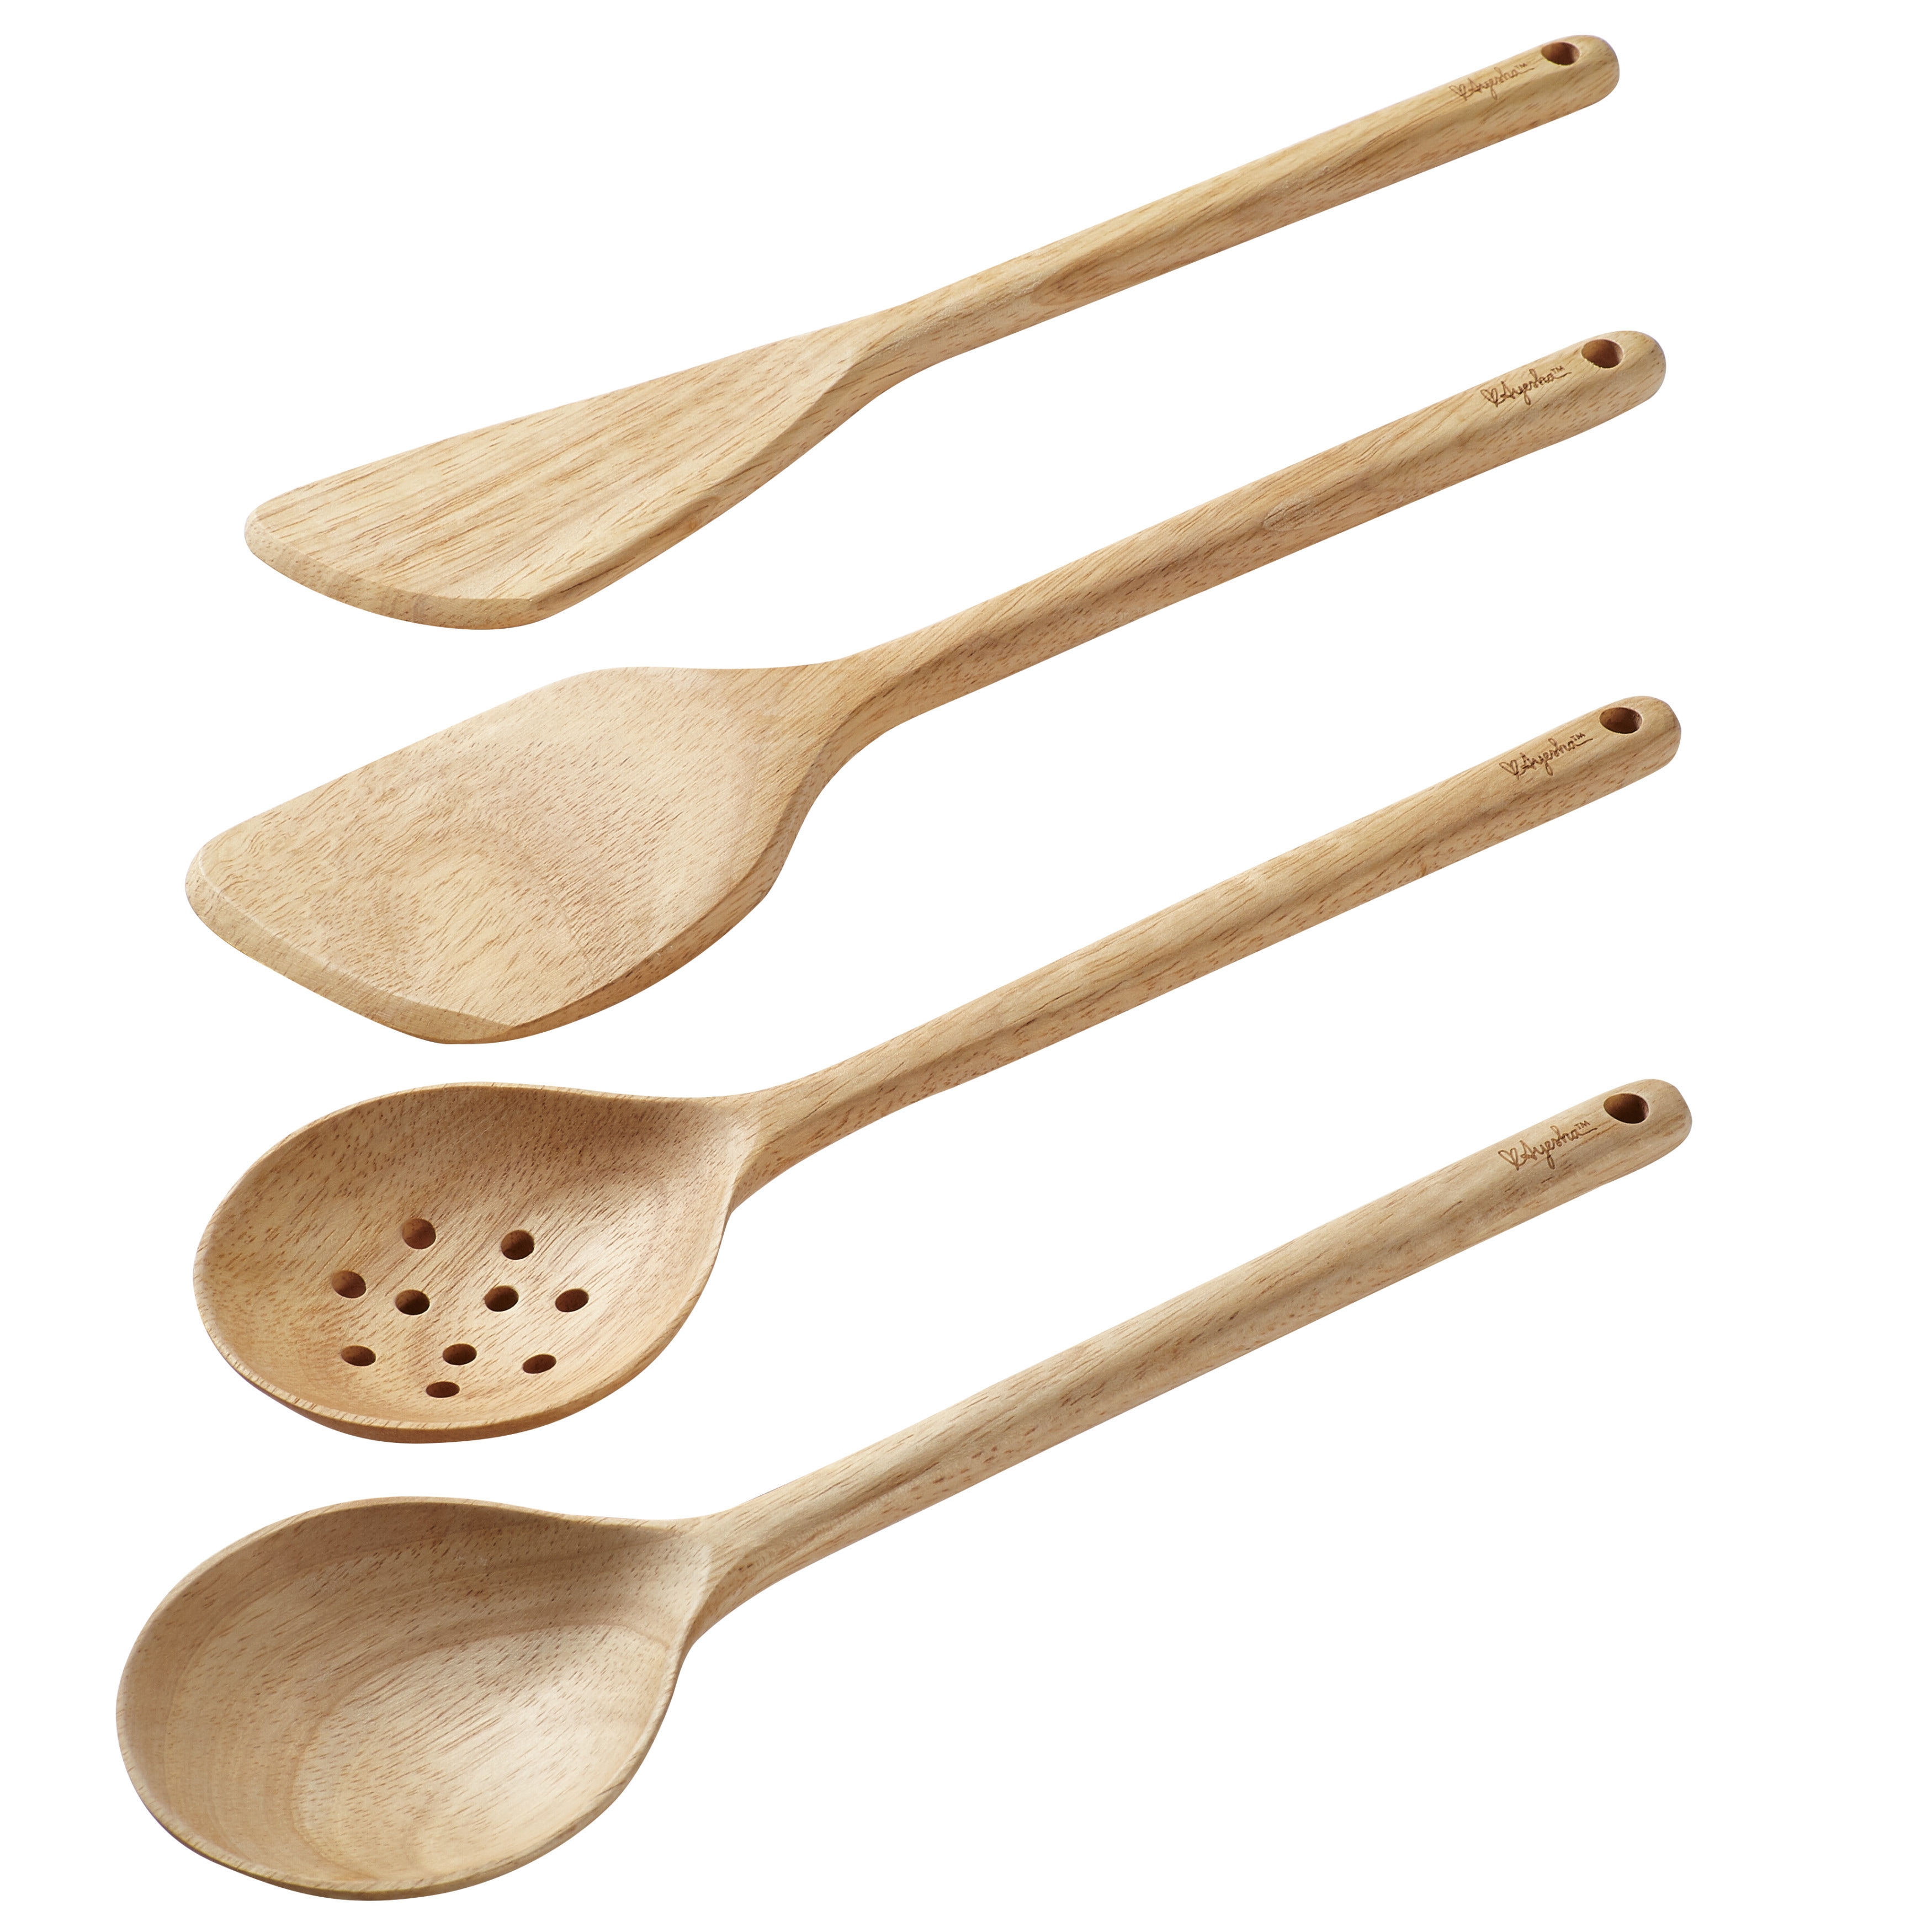 https://ak1.ostkcdn.com/images/products/20006970/Ayesha-Curry-Parawood-Cooking-Tool-Set-4-Piece-cbca940e-17af-471d-a2a5-64b3add8bcc8.jpg